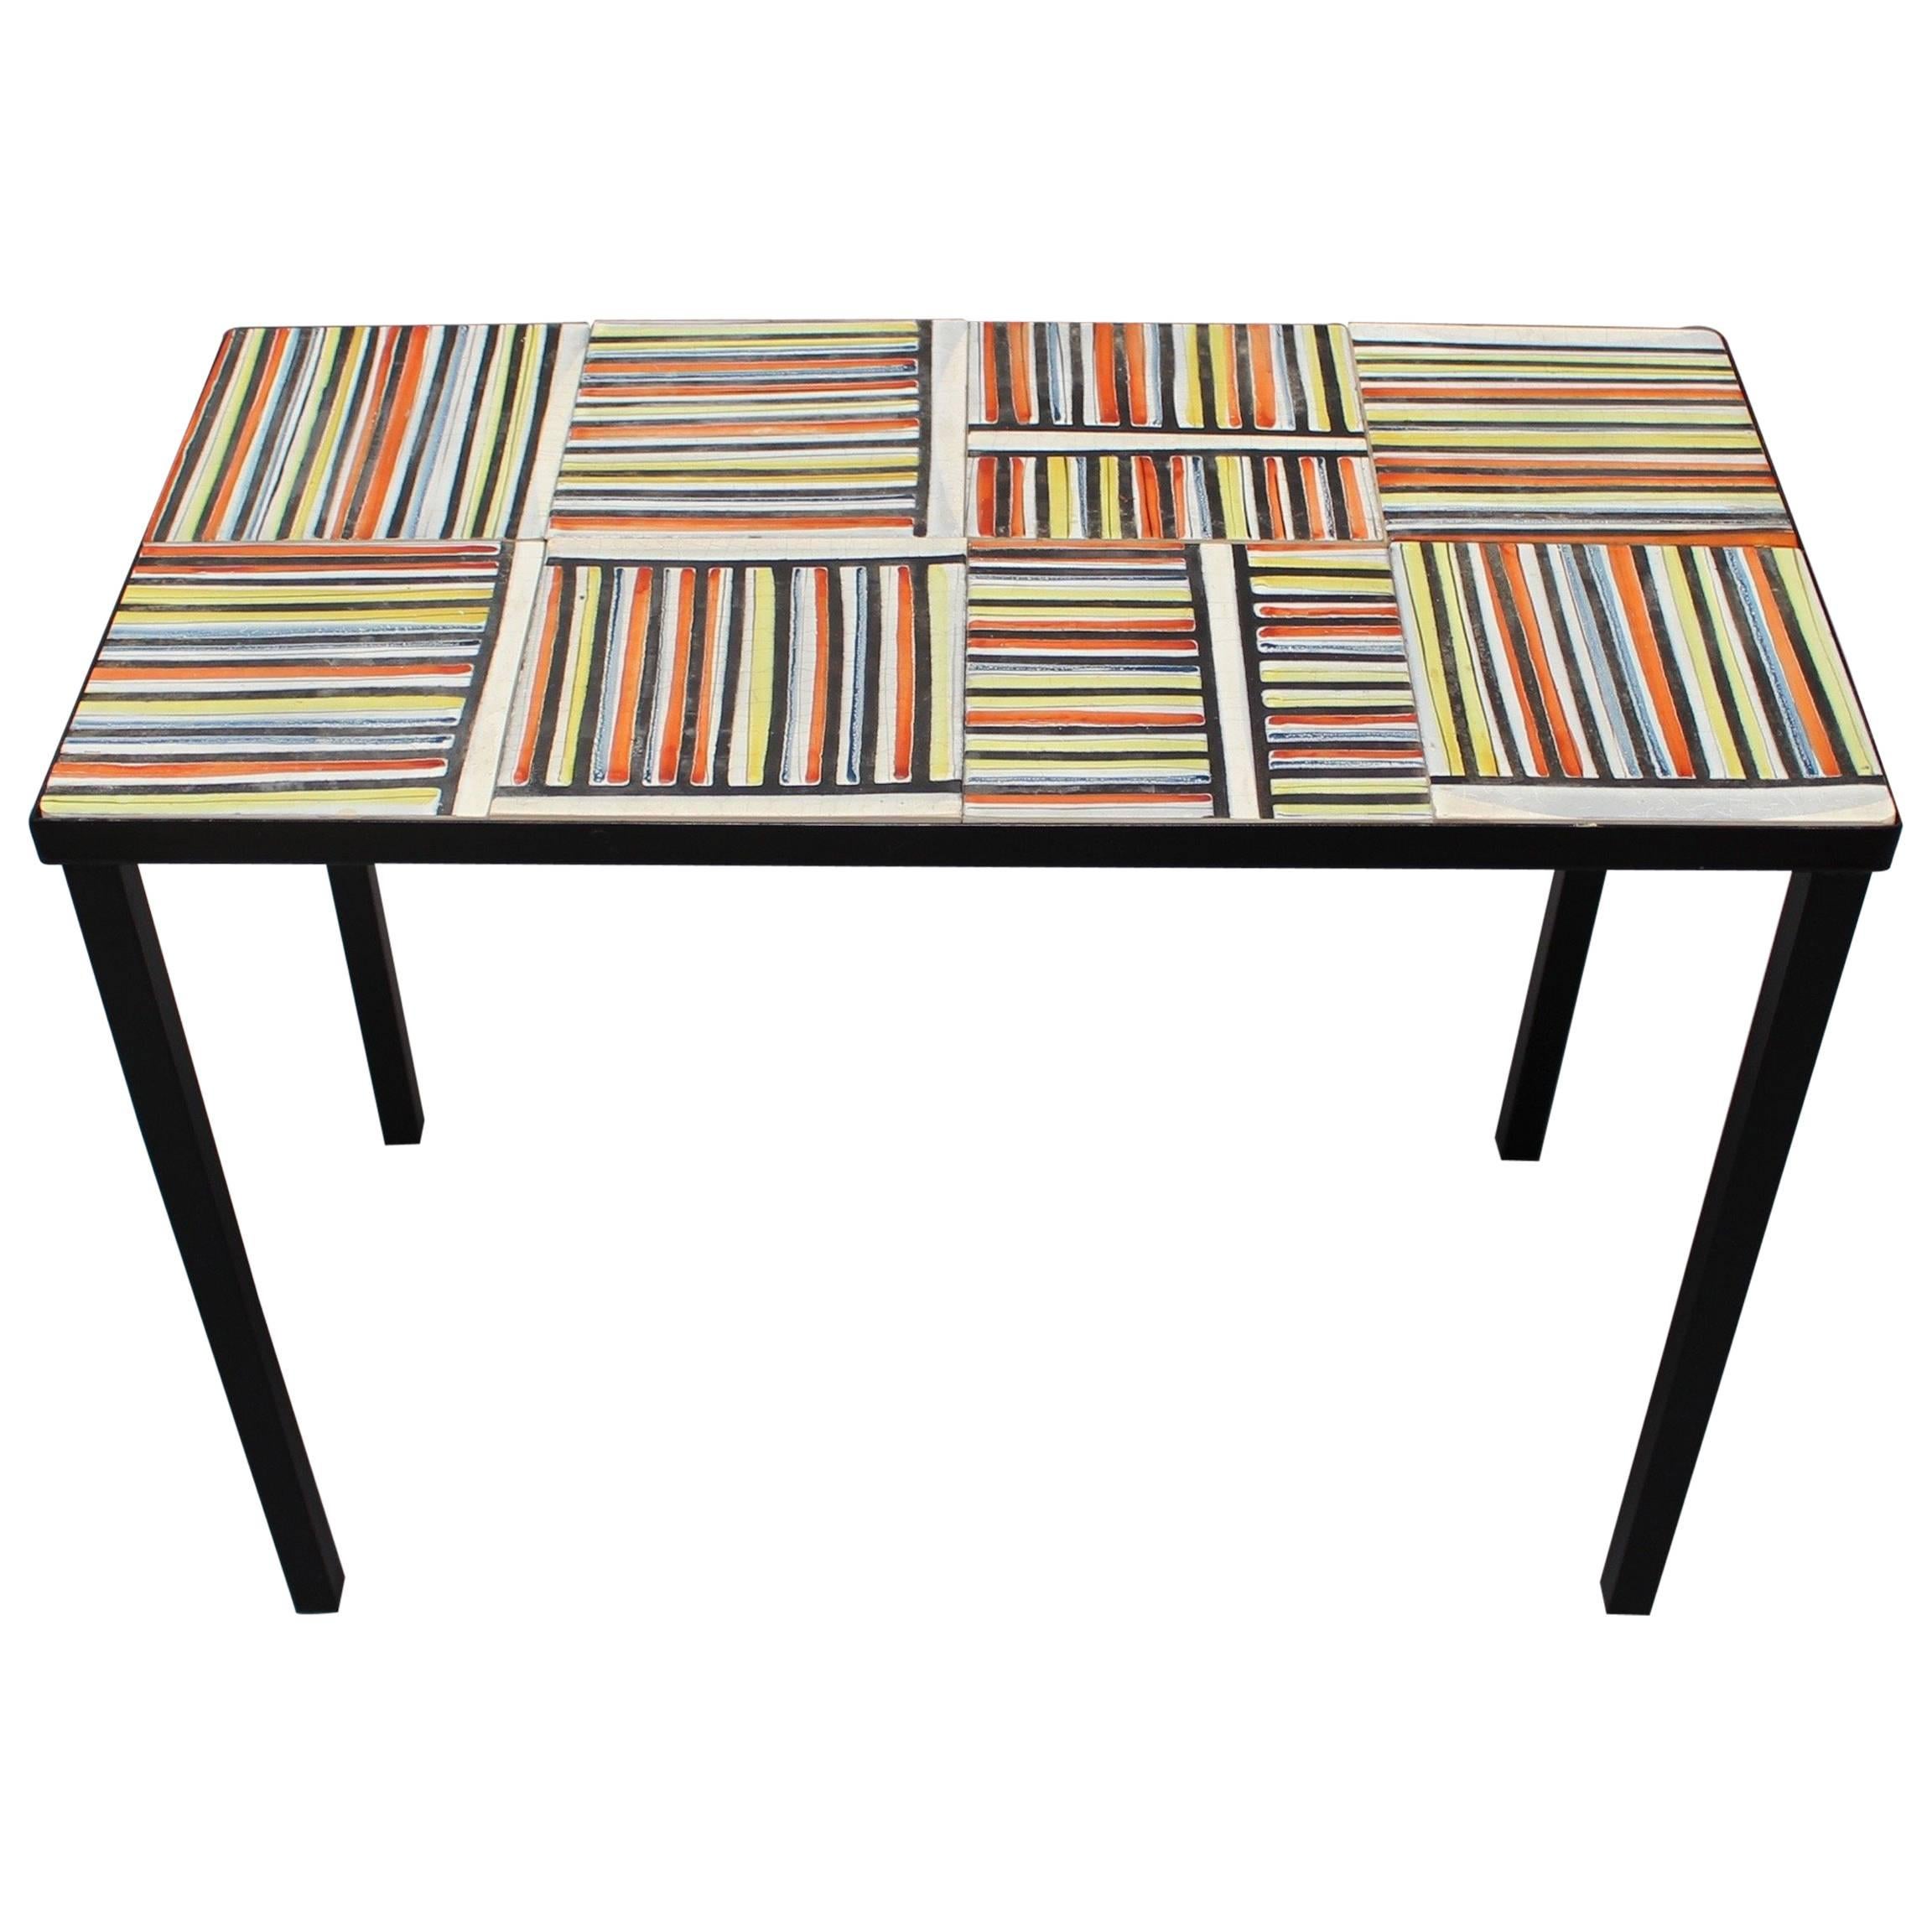 Coffee Table with 'Pyjama' Ceramic Tiles by Roger Capron, Vallauris, circa 1950s